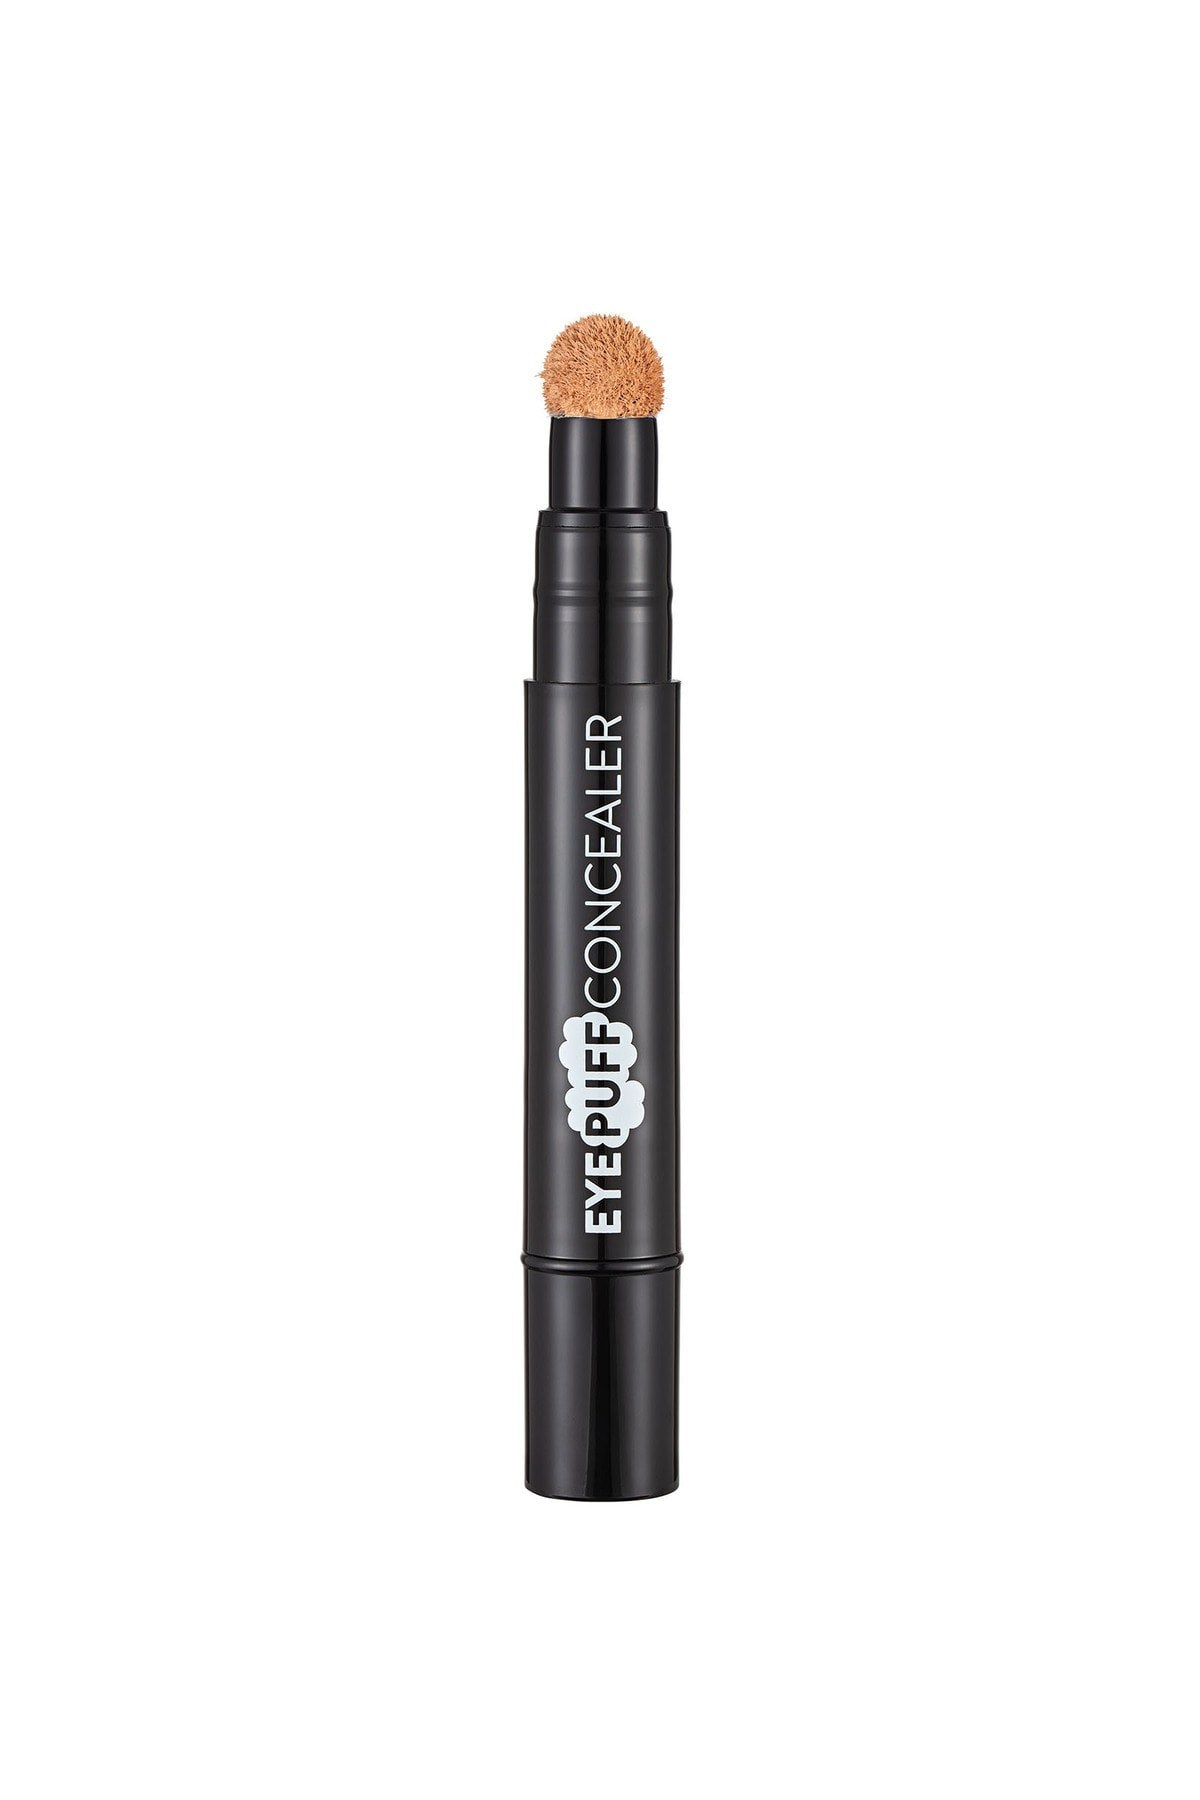 Flormar Stay Perfect Concealer 002 Light 12.5ml